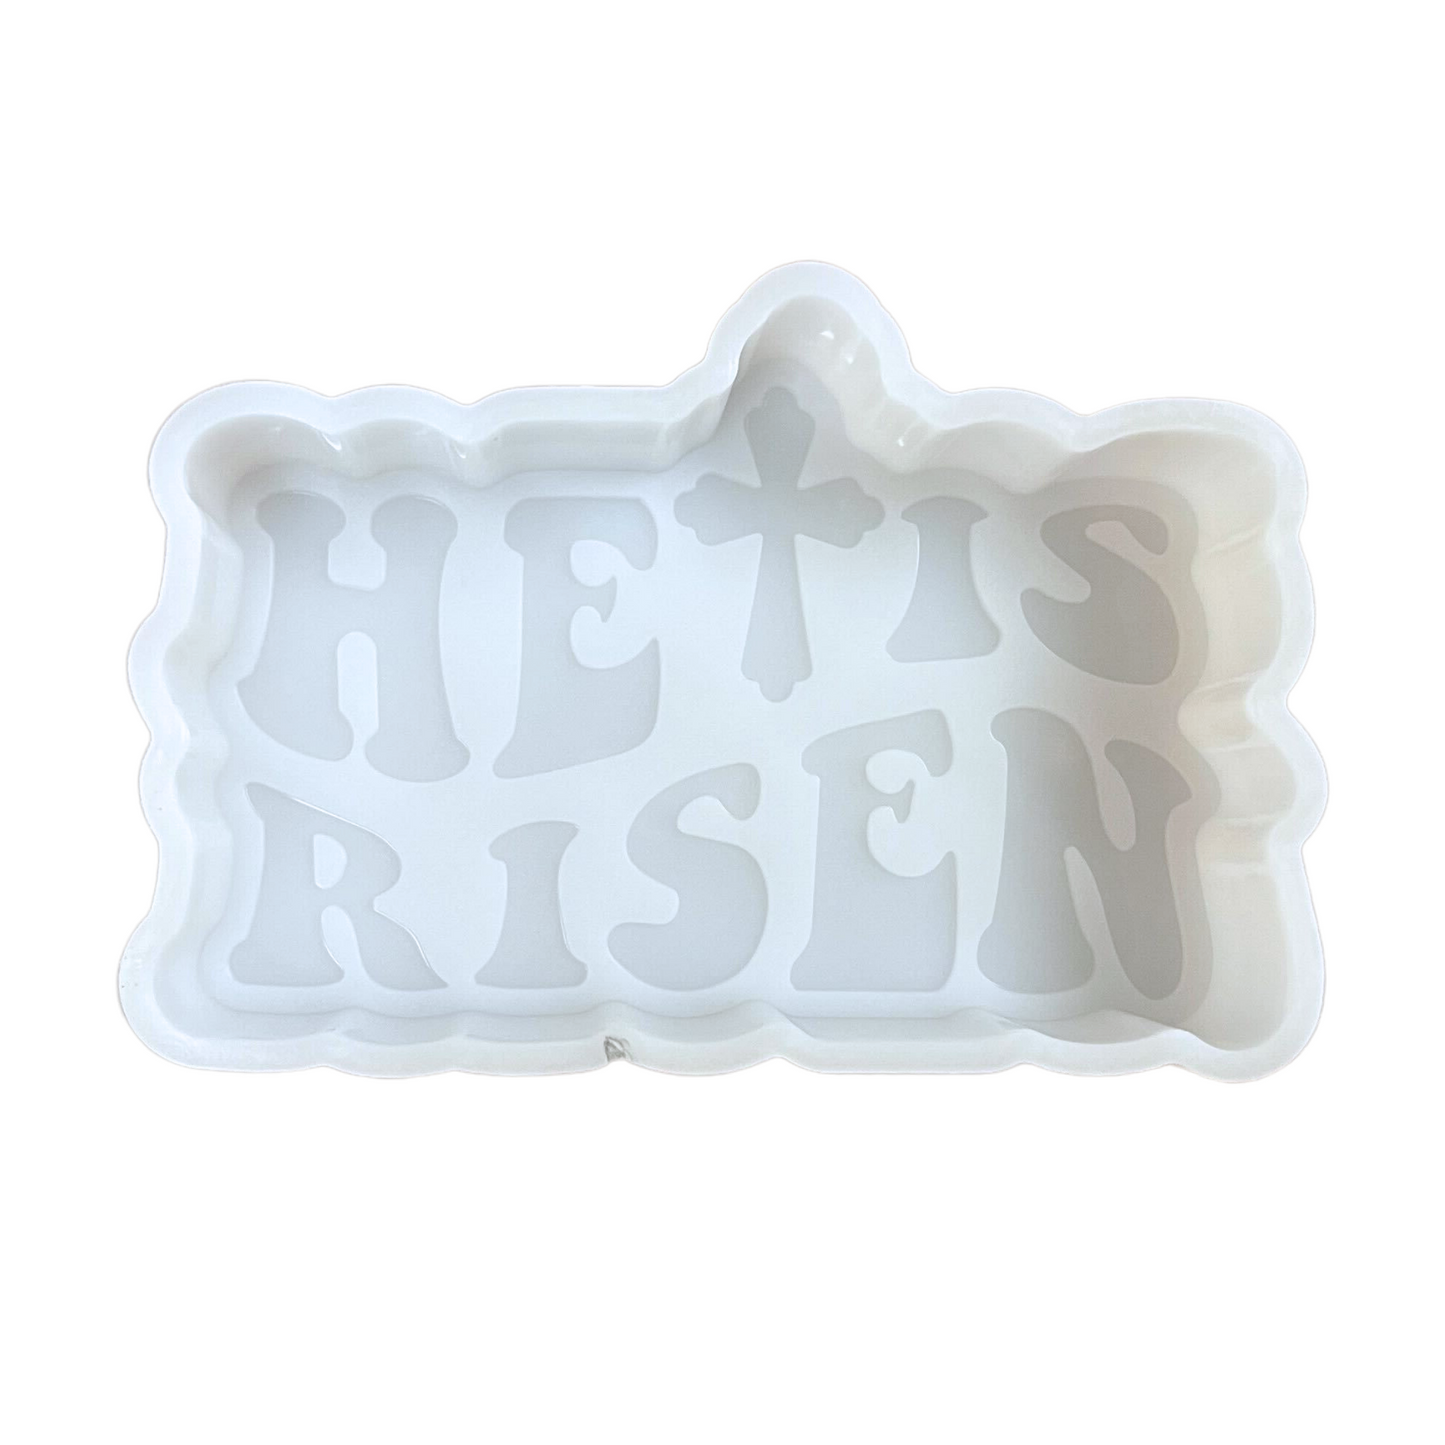 He is Risen Silicone Mold